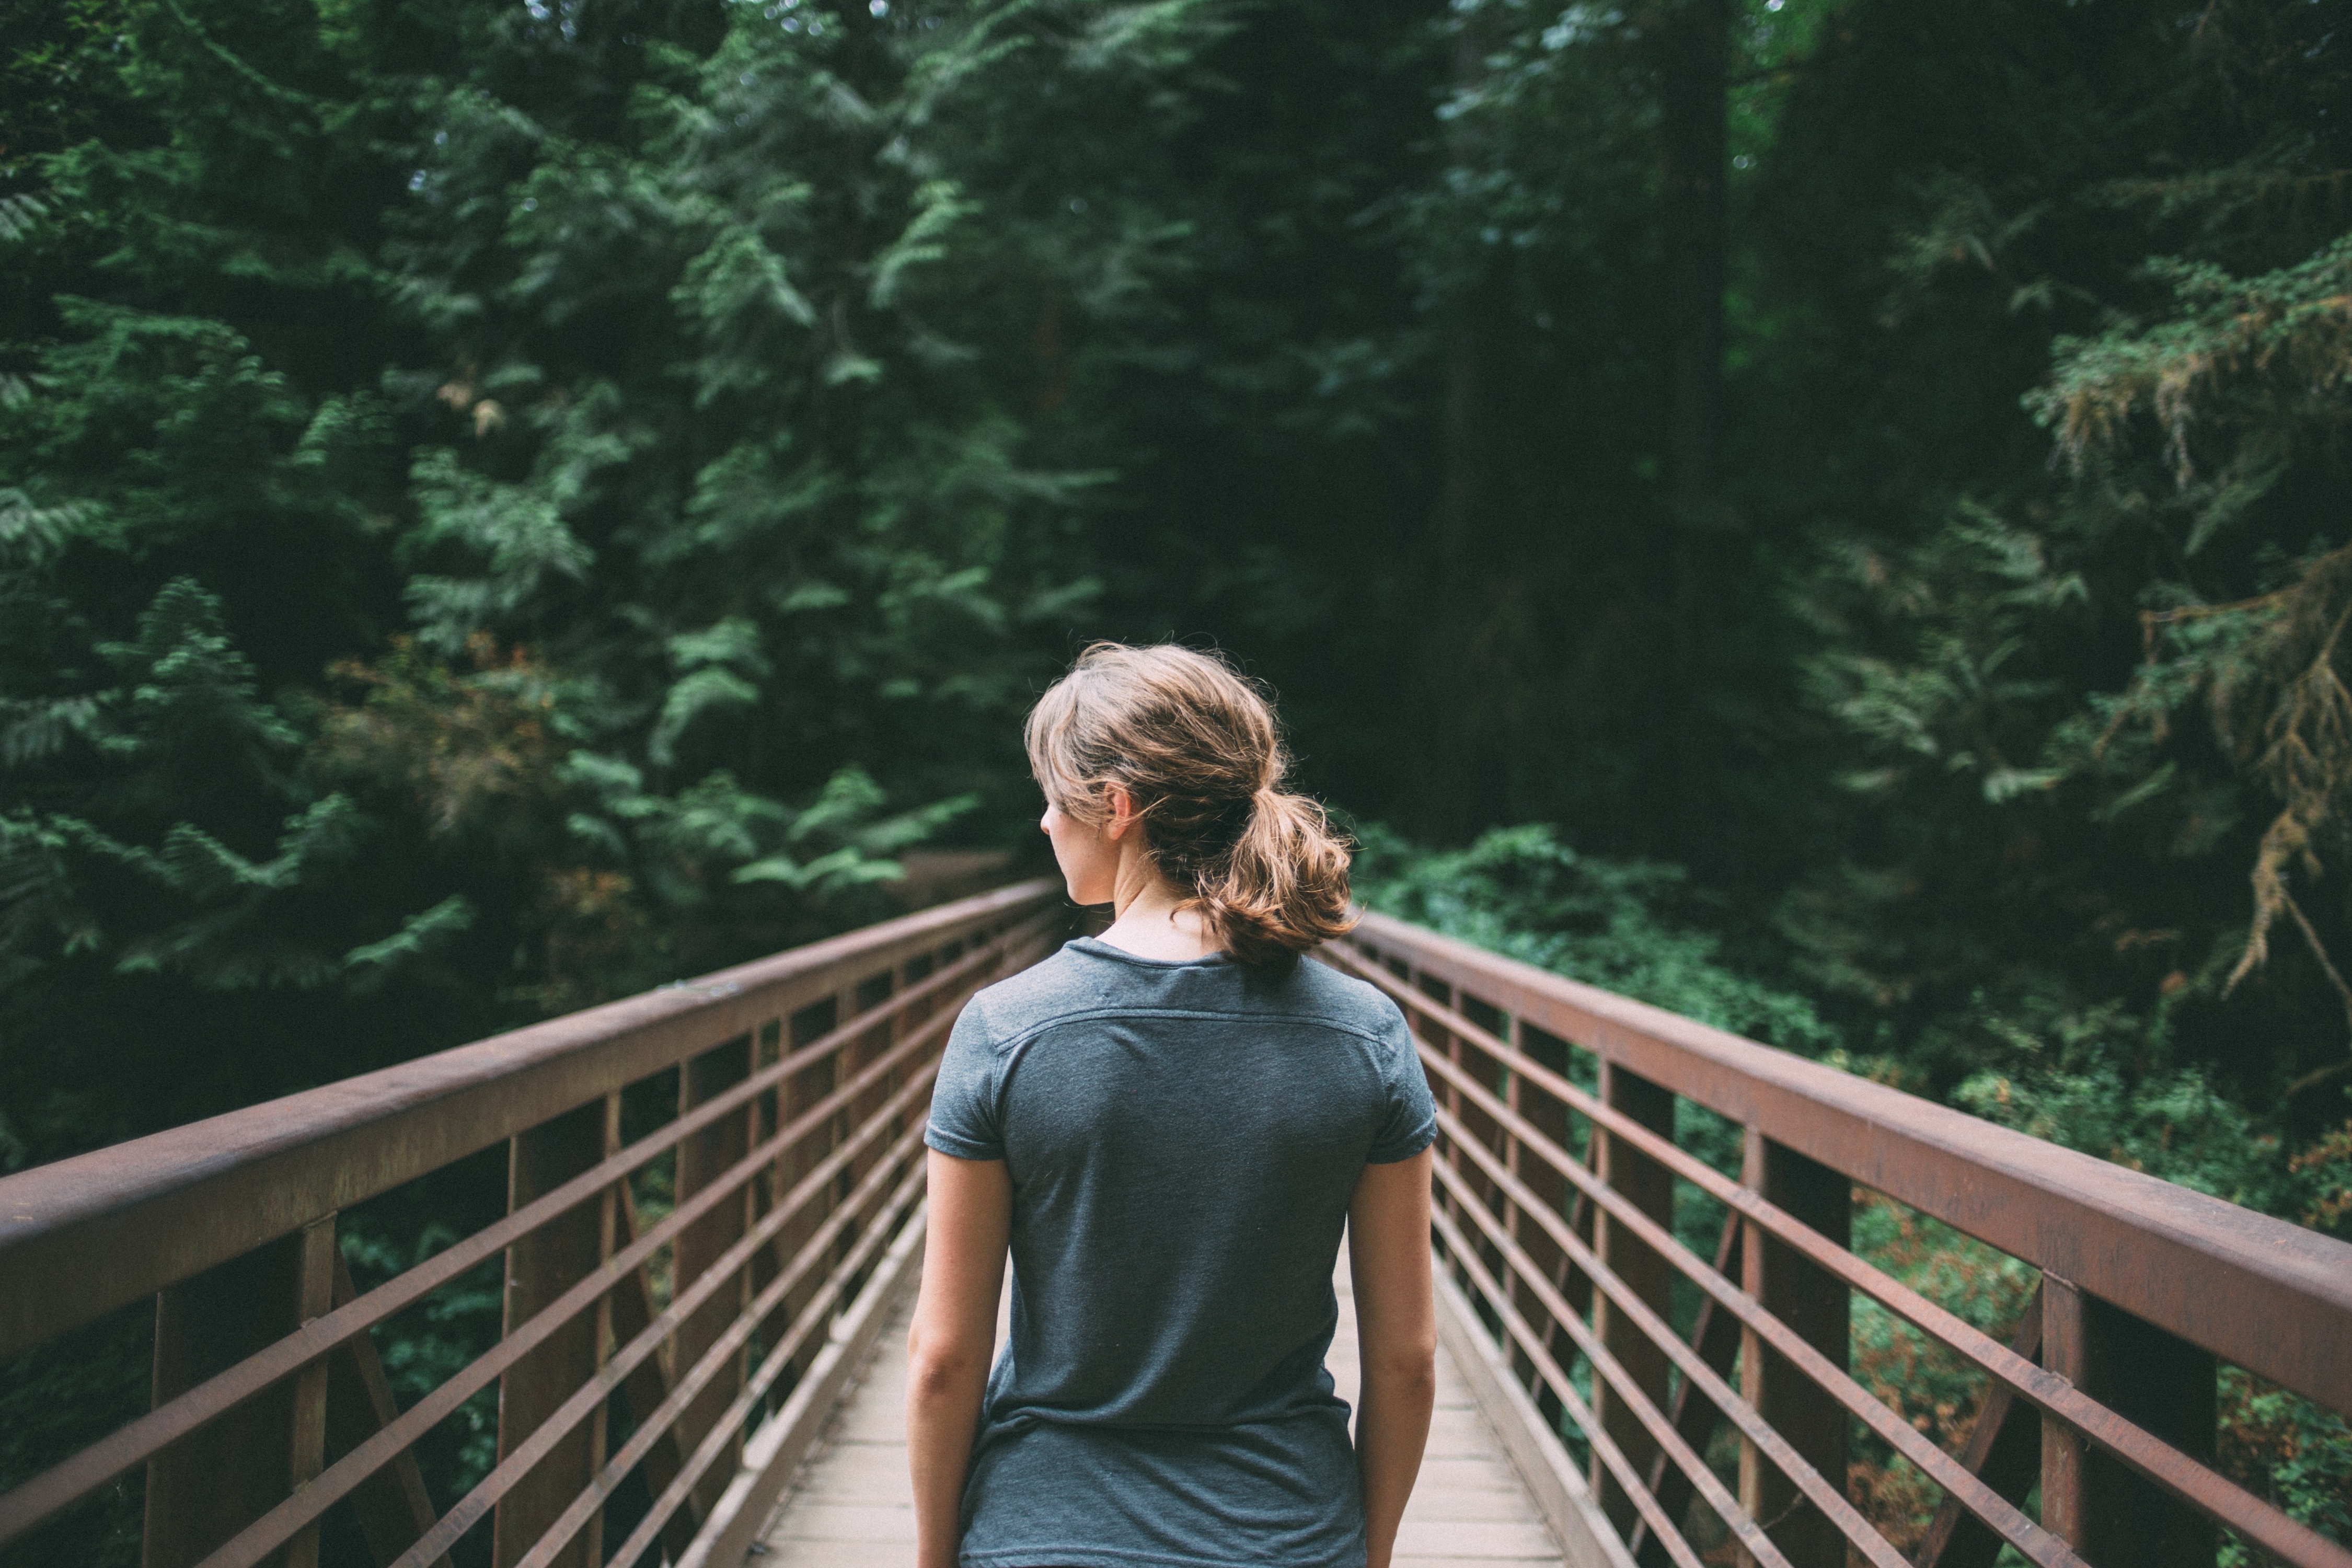 A back shot of a woman on a bridge in a forest